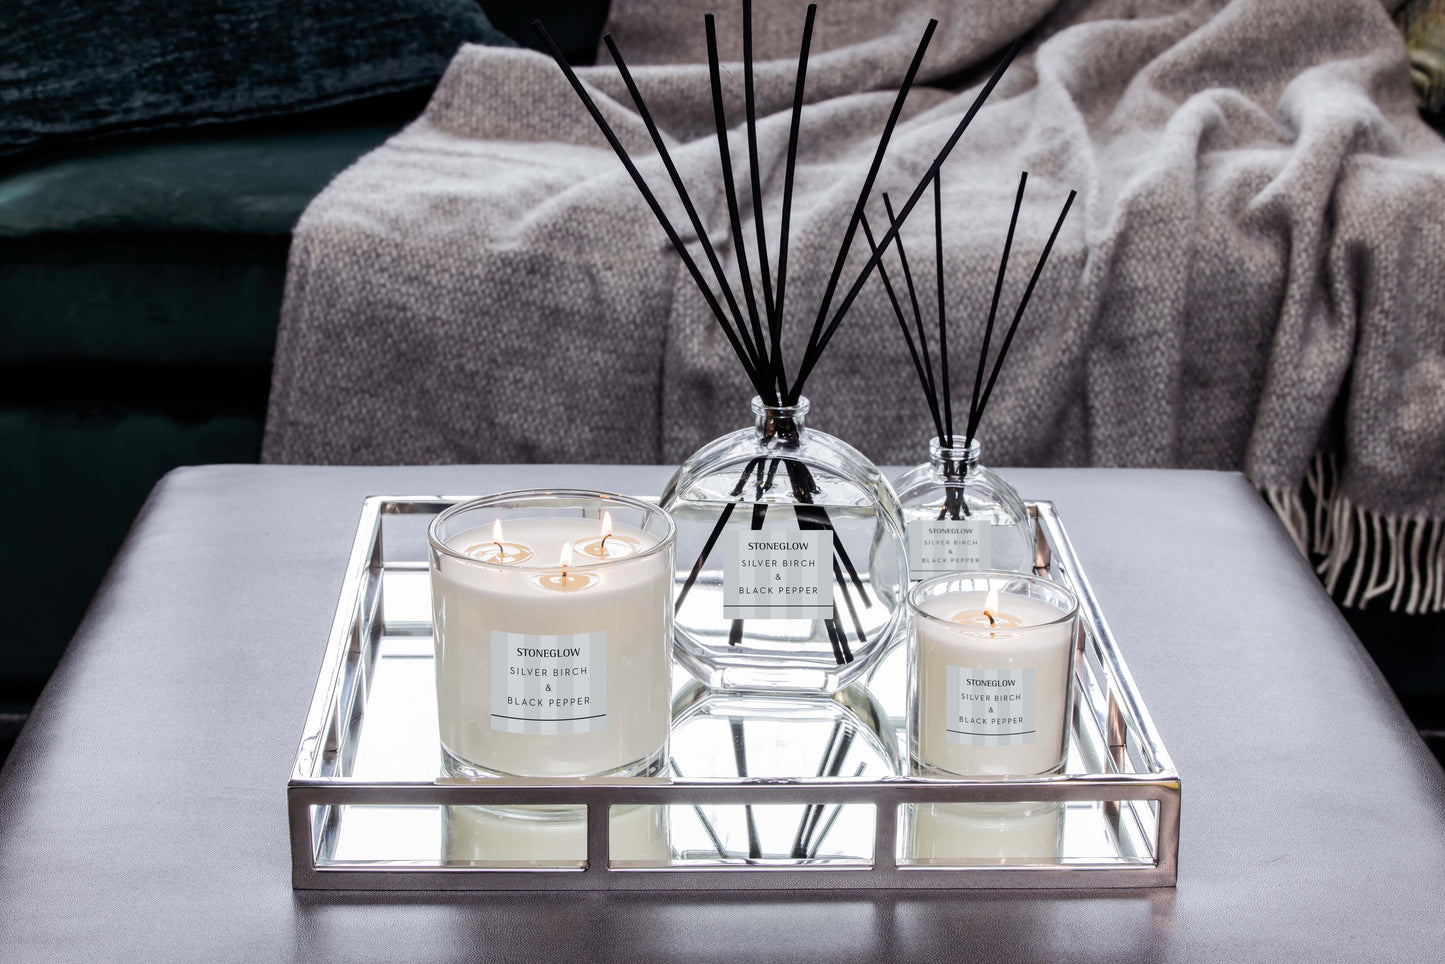 Stoneglow Modern Classics Collection Scented Candle, Silver Birch & Black Pepper